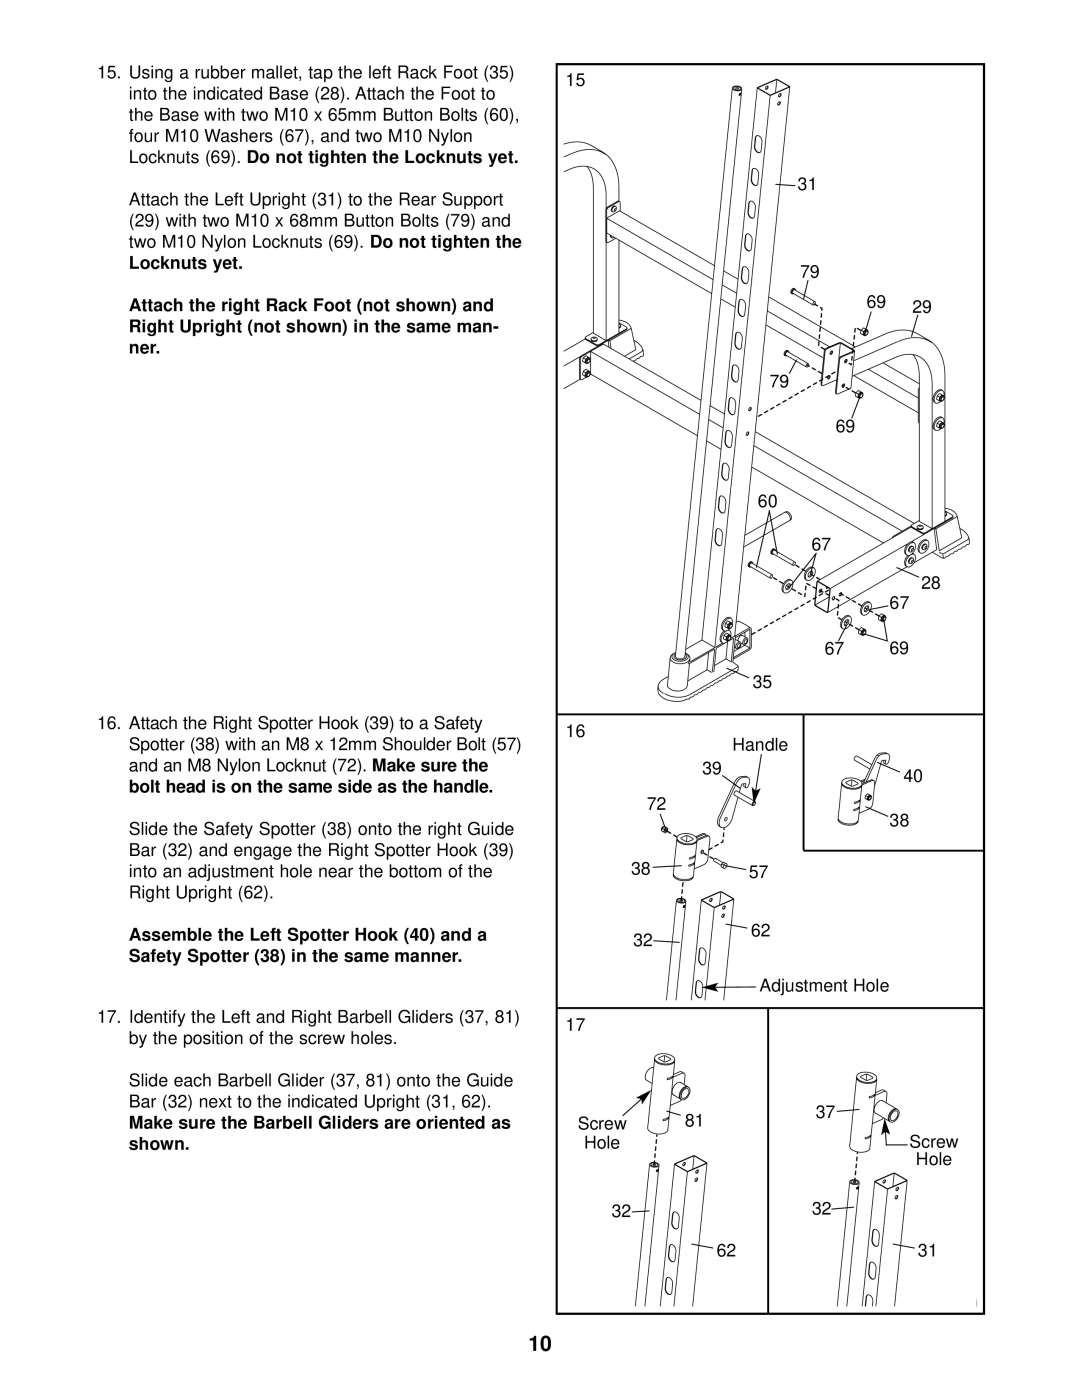 ProForm 831.150330, C800 user manual Locknuts yet, Make sure the Barbell Gliders are oriented as shown 